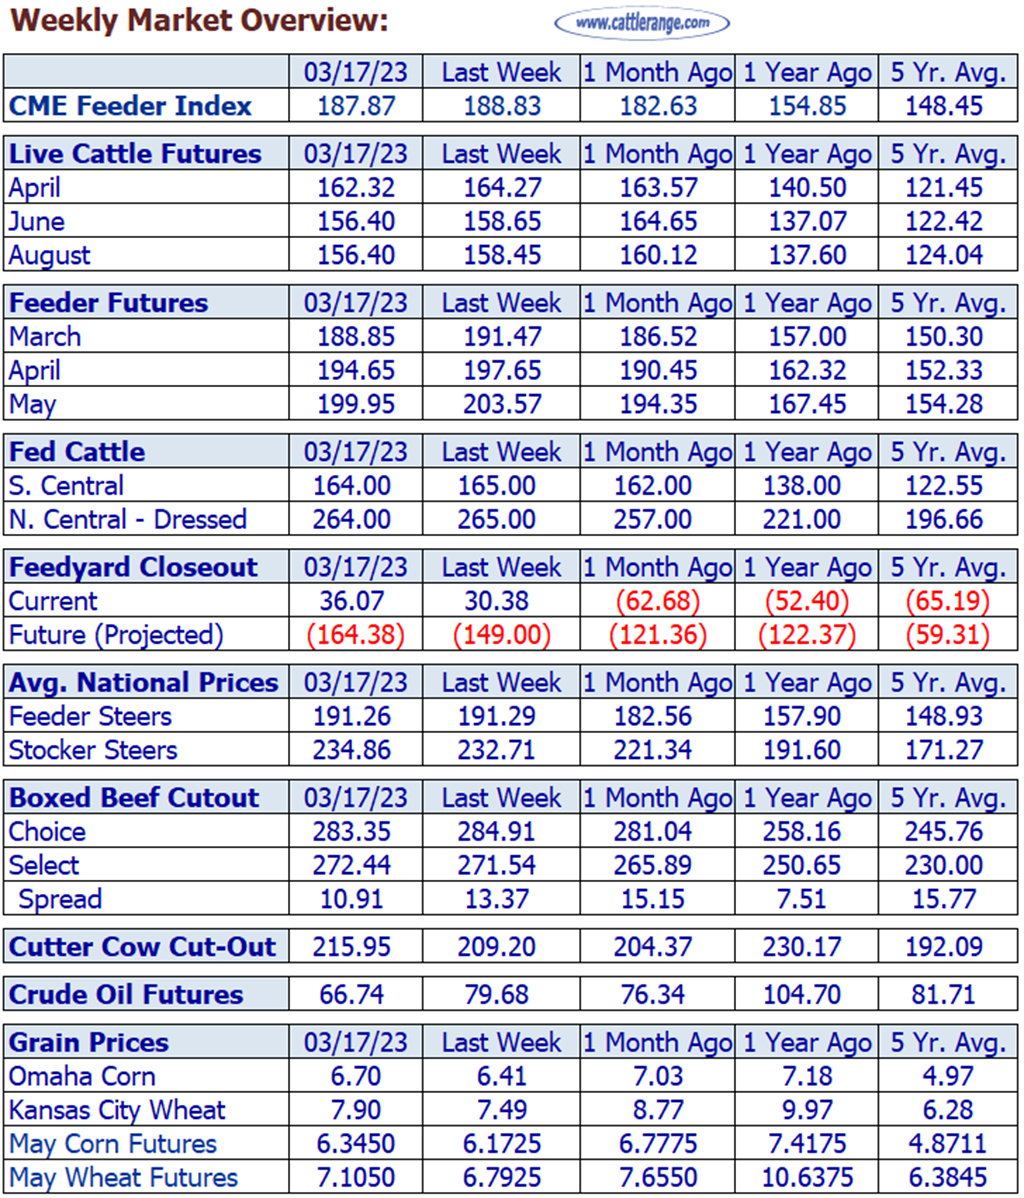 Weekly Cattle Market Overview for Week Ending 3/17/23